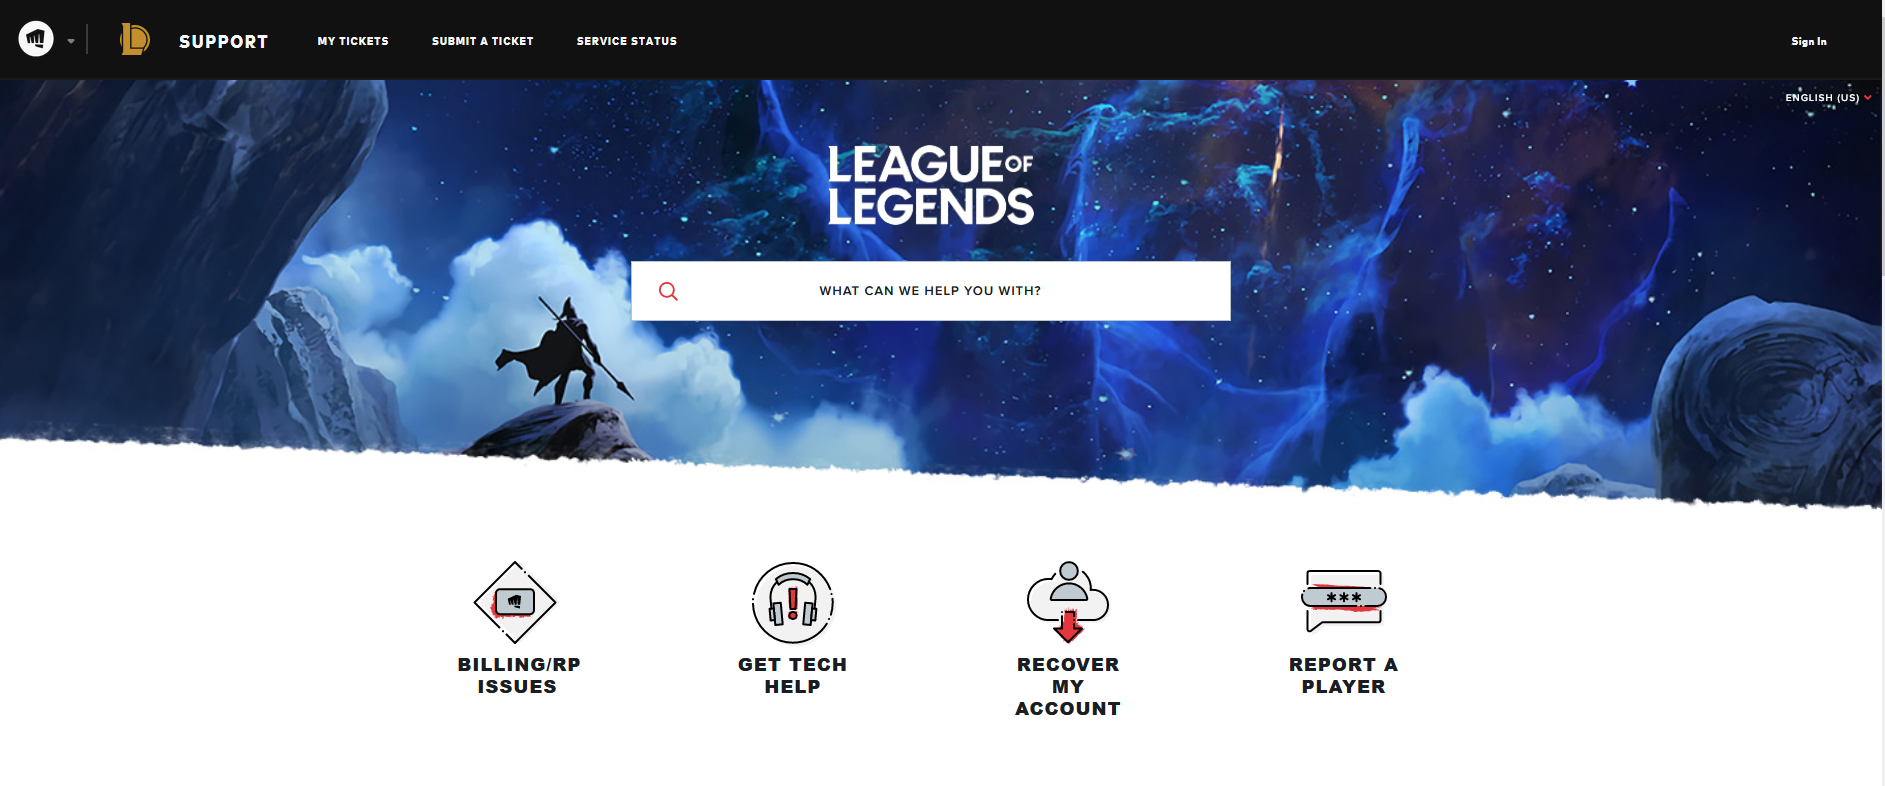 How to Tell How Old your League of Legends Account is